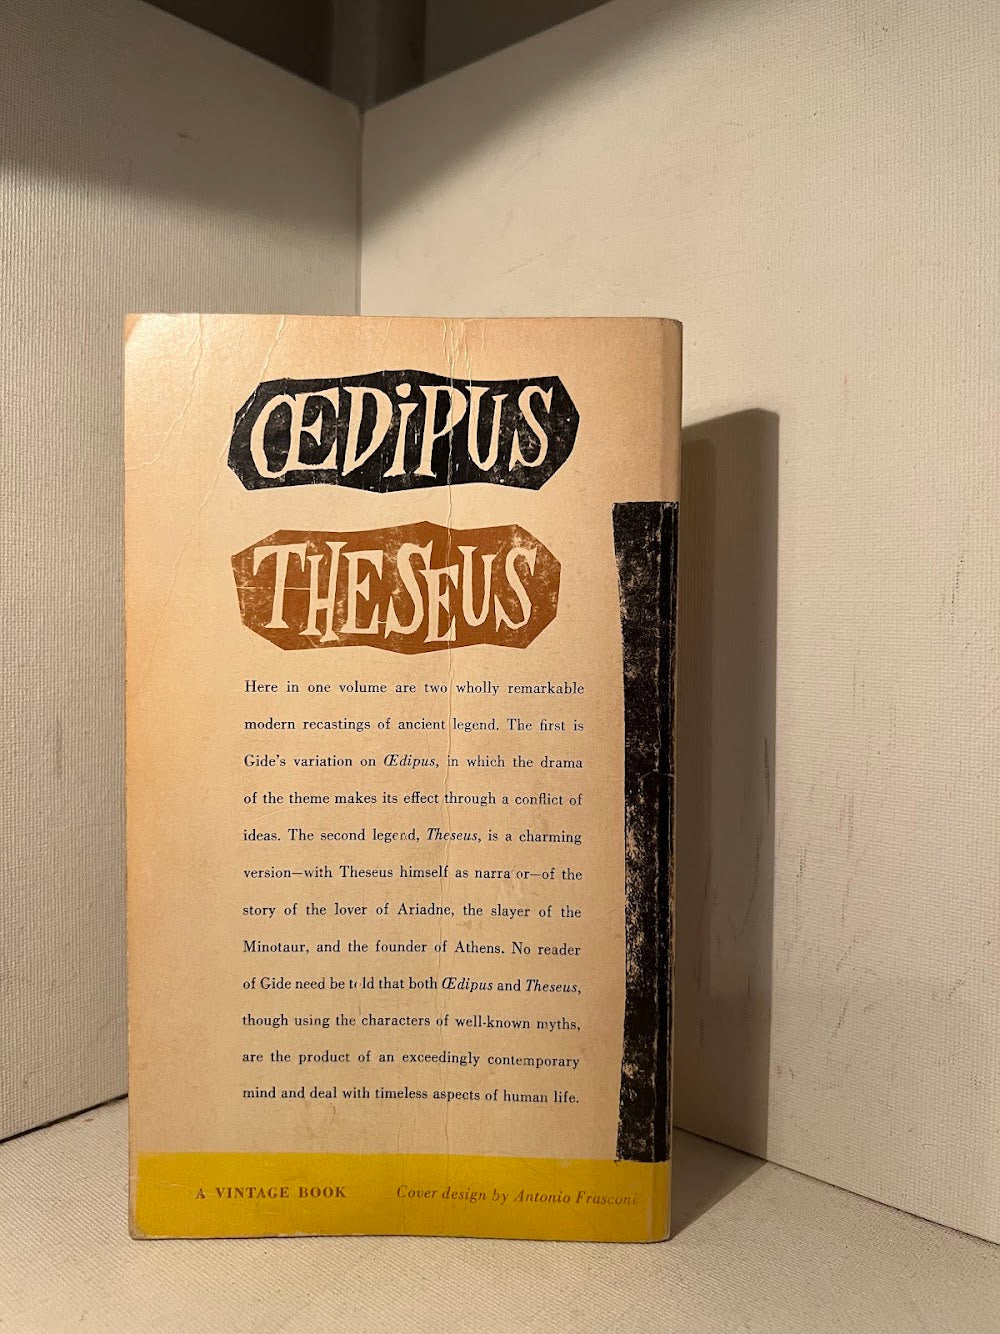 Oedipus and Theseus by Andre Gide